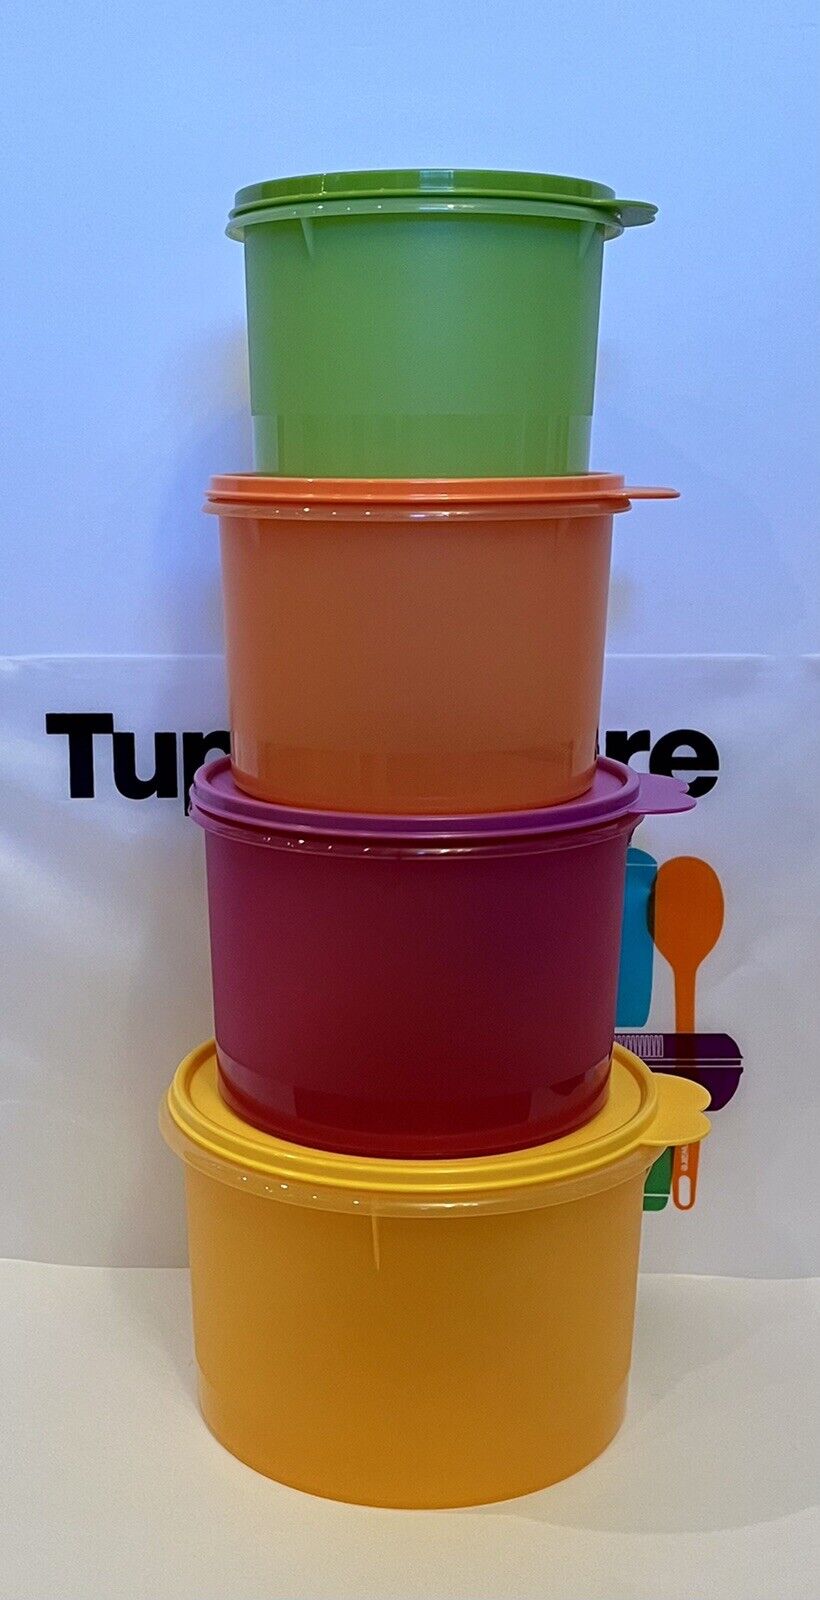 Tupperware Stacking Nesting Canisters 4 Pc Storage Canning Crafts Toys Decor NEW